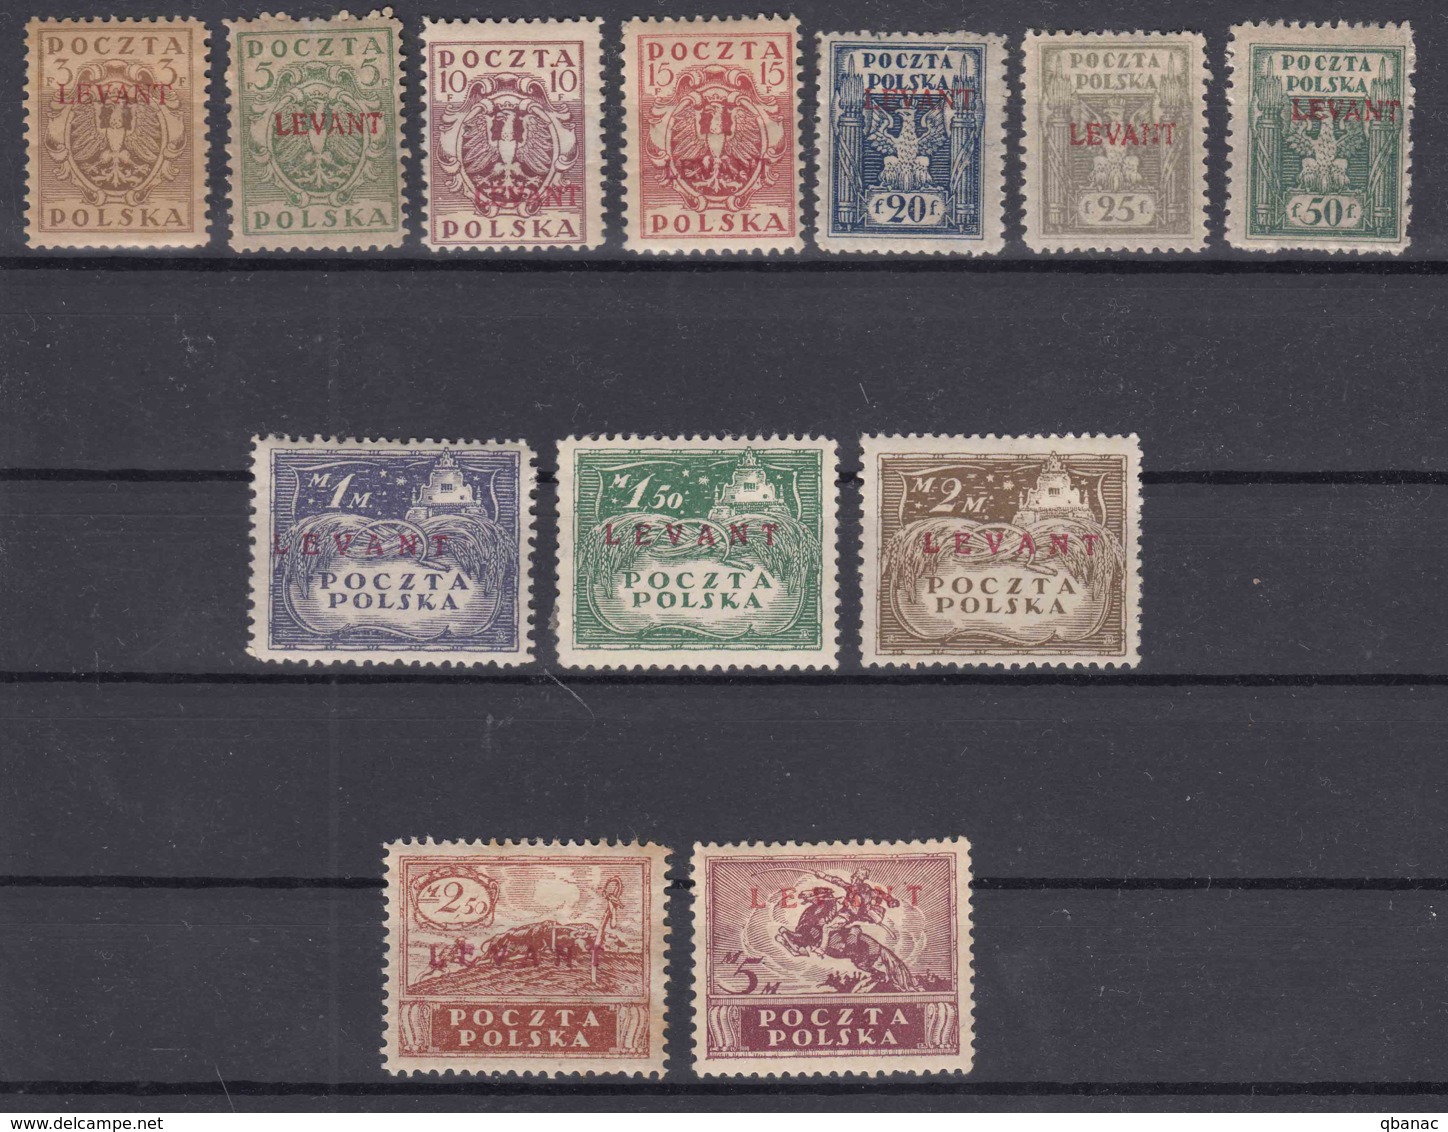 Poland Post Offices In Levant (Turkey) 1919 Mi#1-12 Mint Hinged Complete Set - Levant (Turkey)